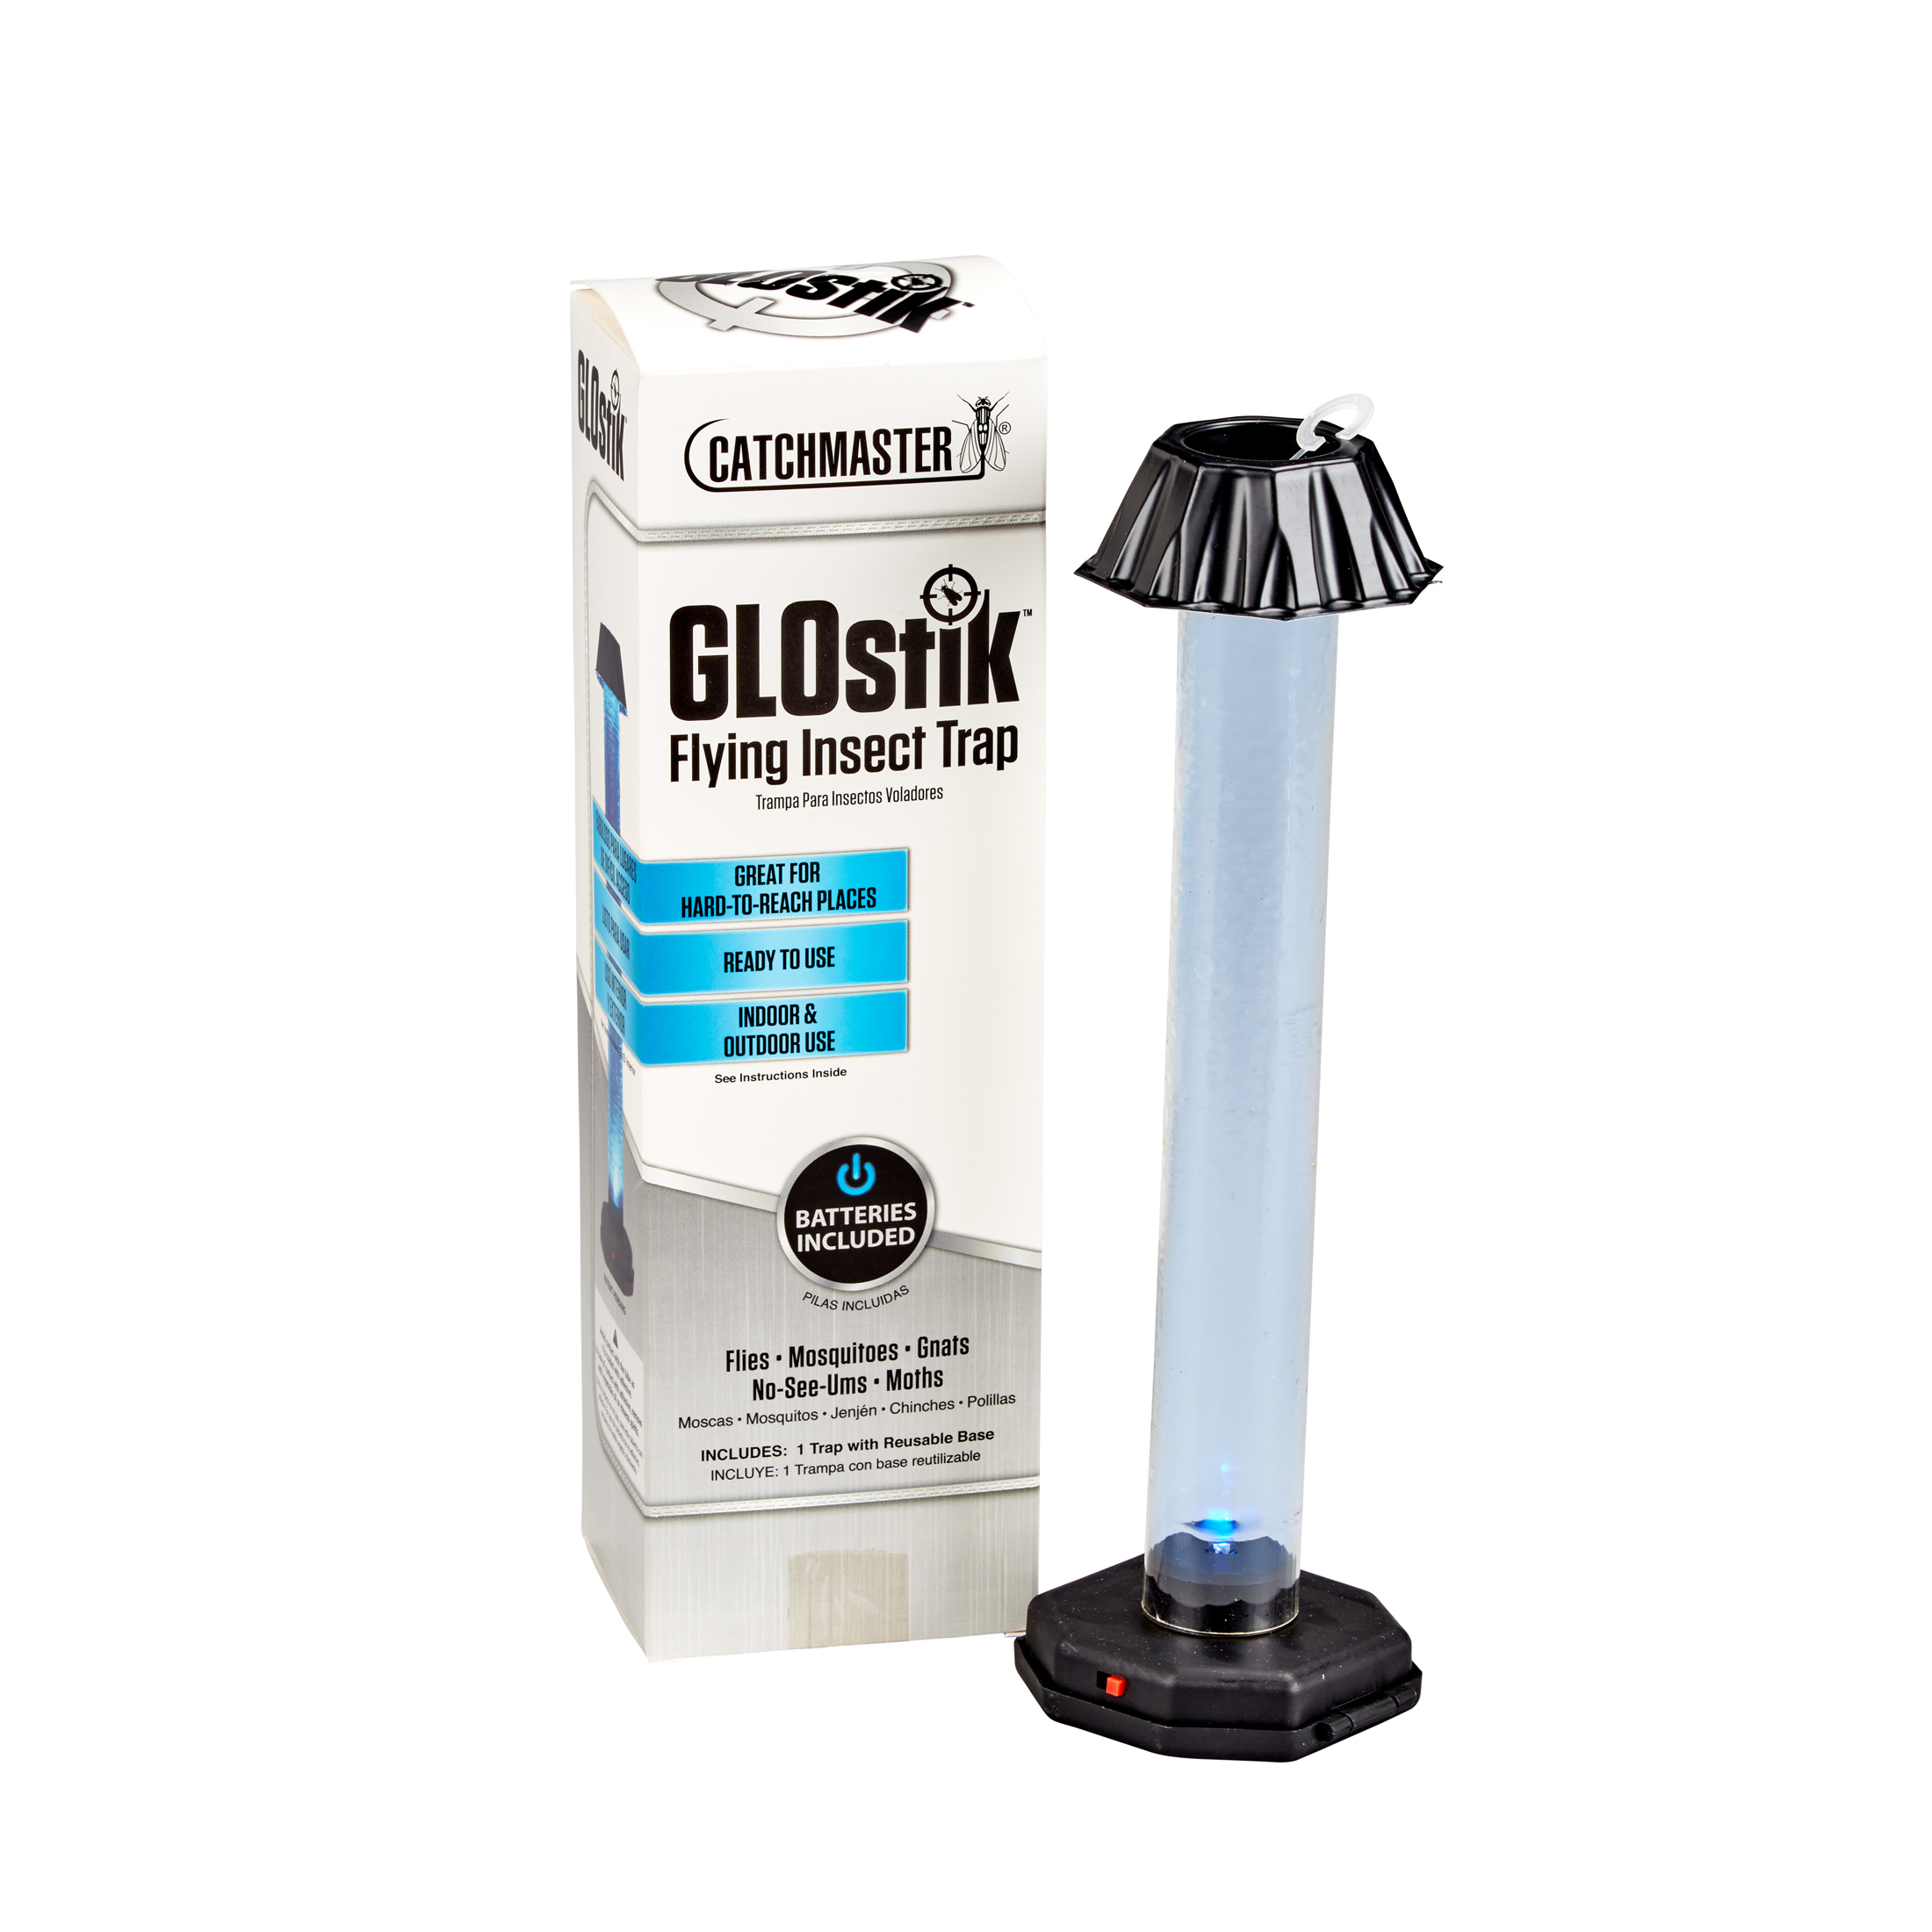 GLOstik Flying Insect Trap